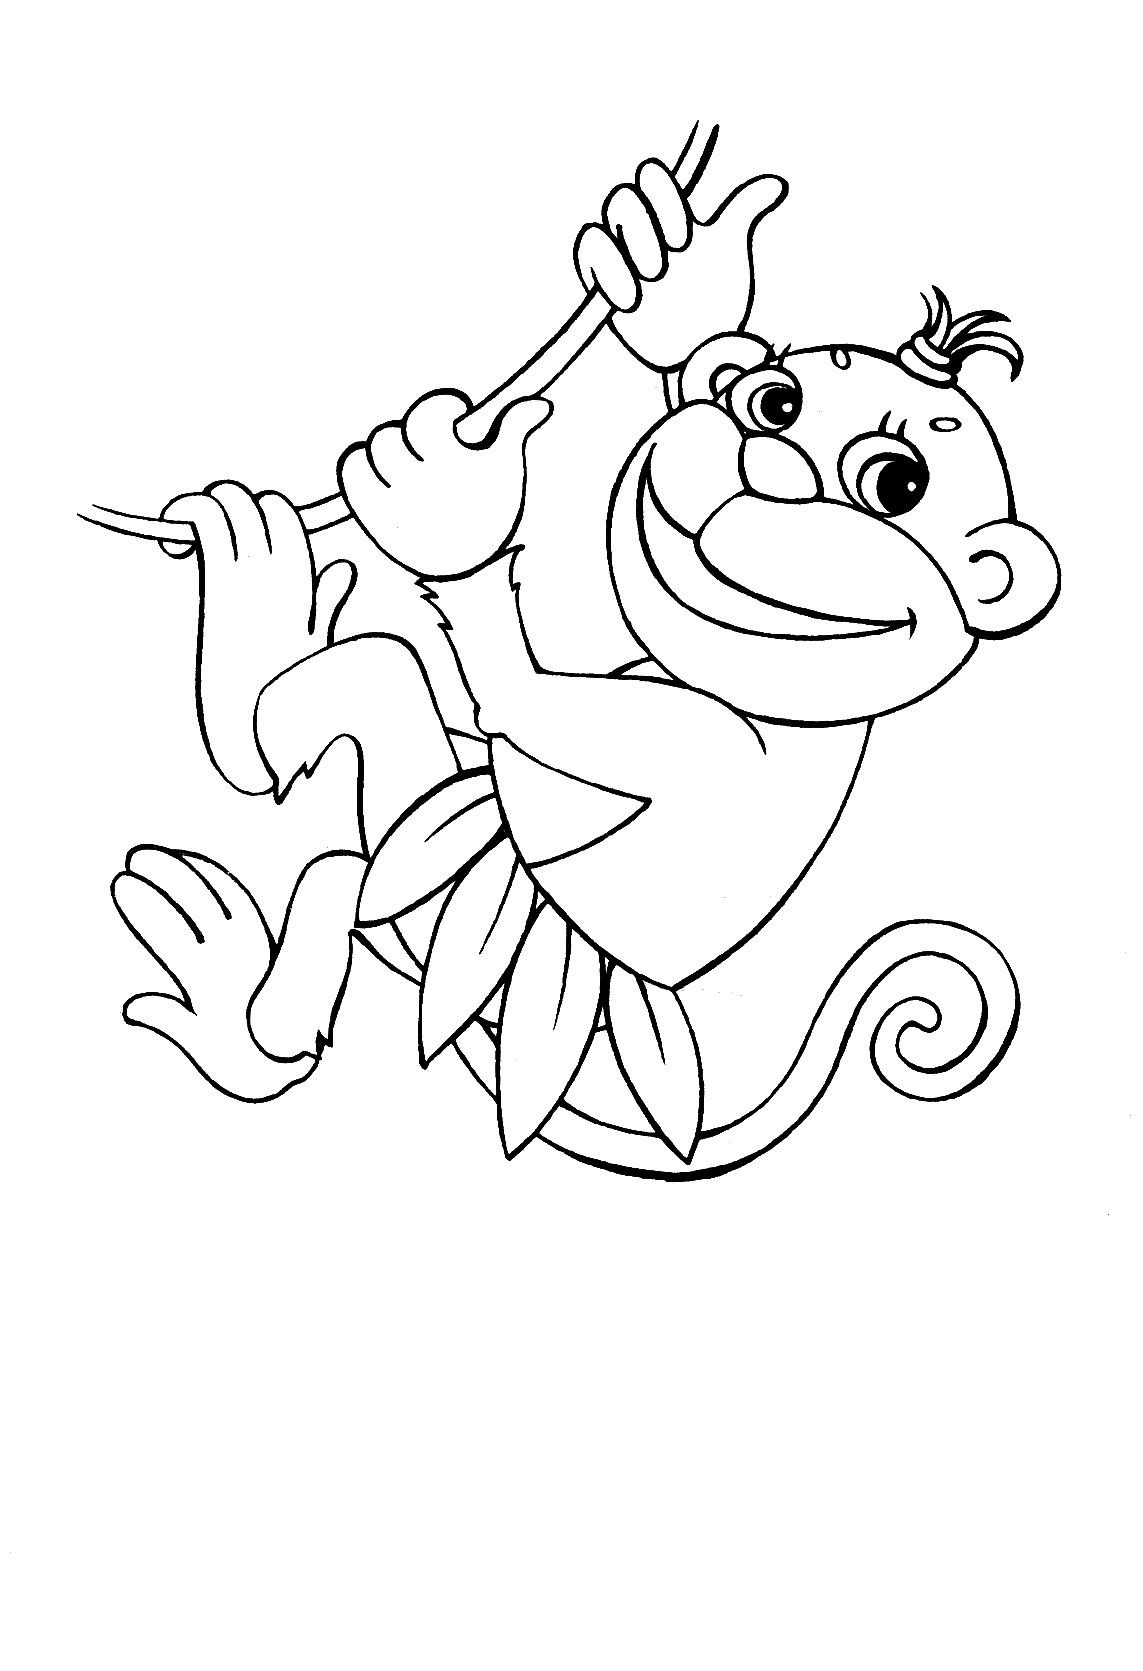 Monkey Coloring Pages | Love coloring pages | #2